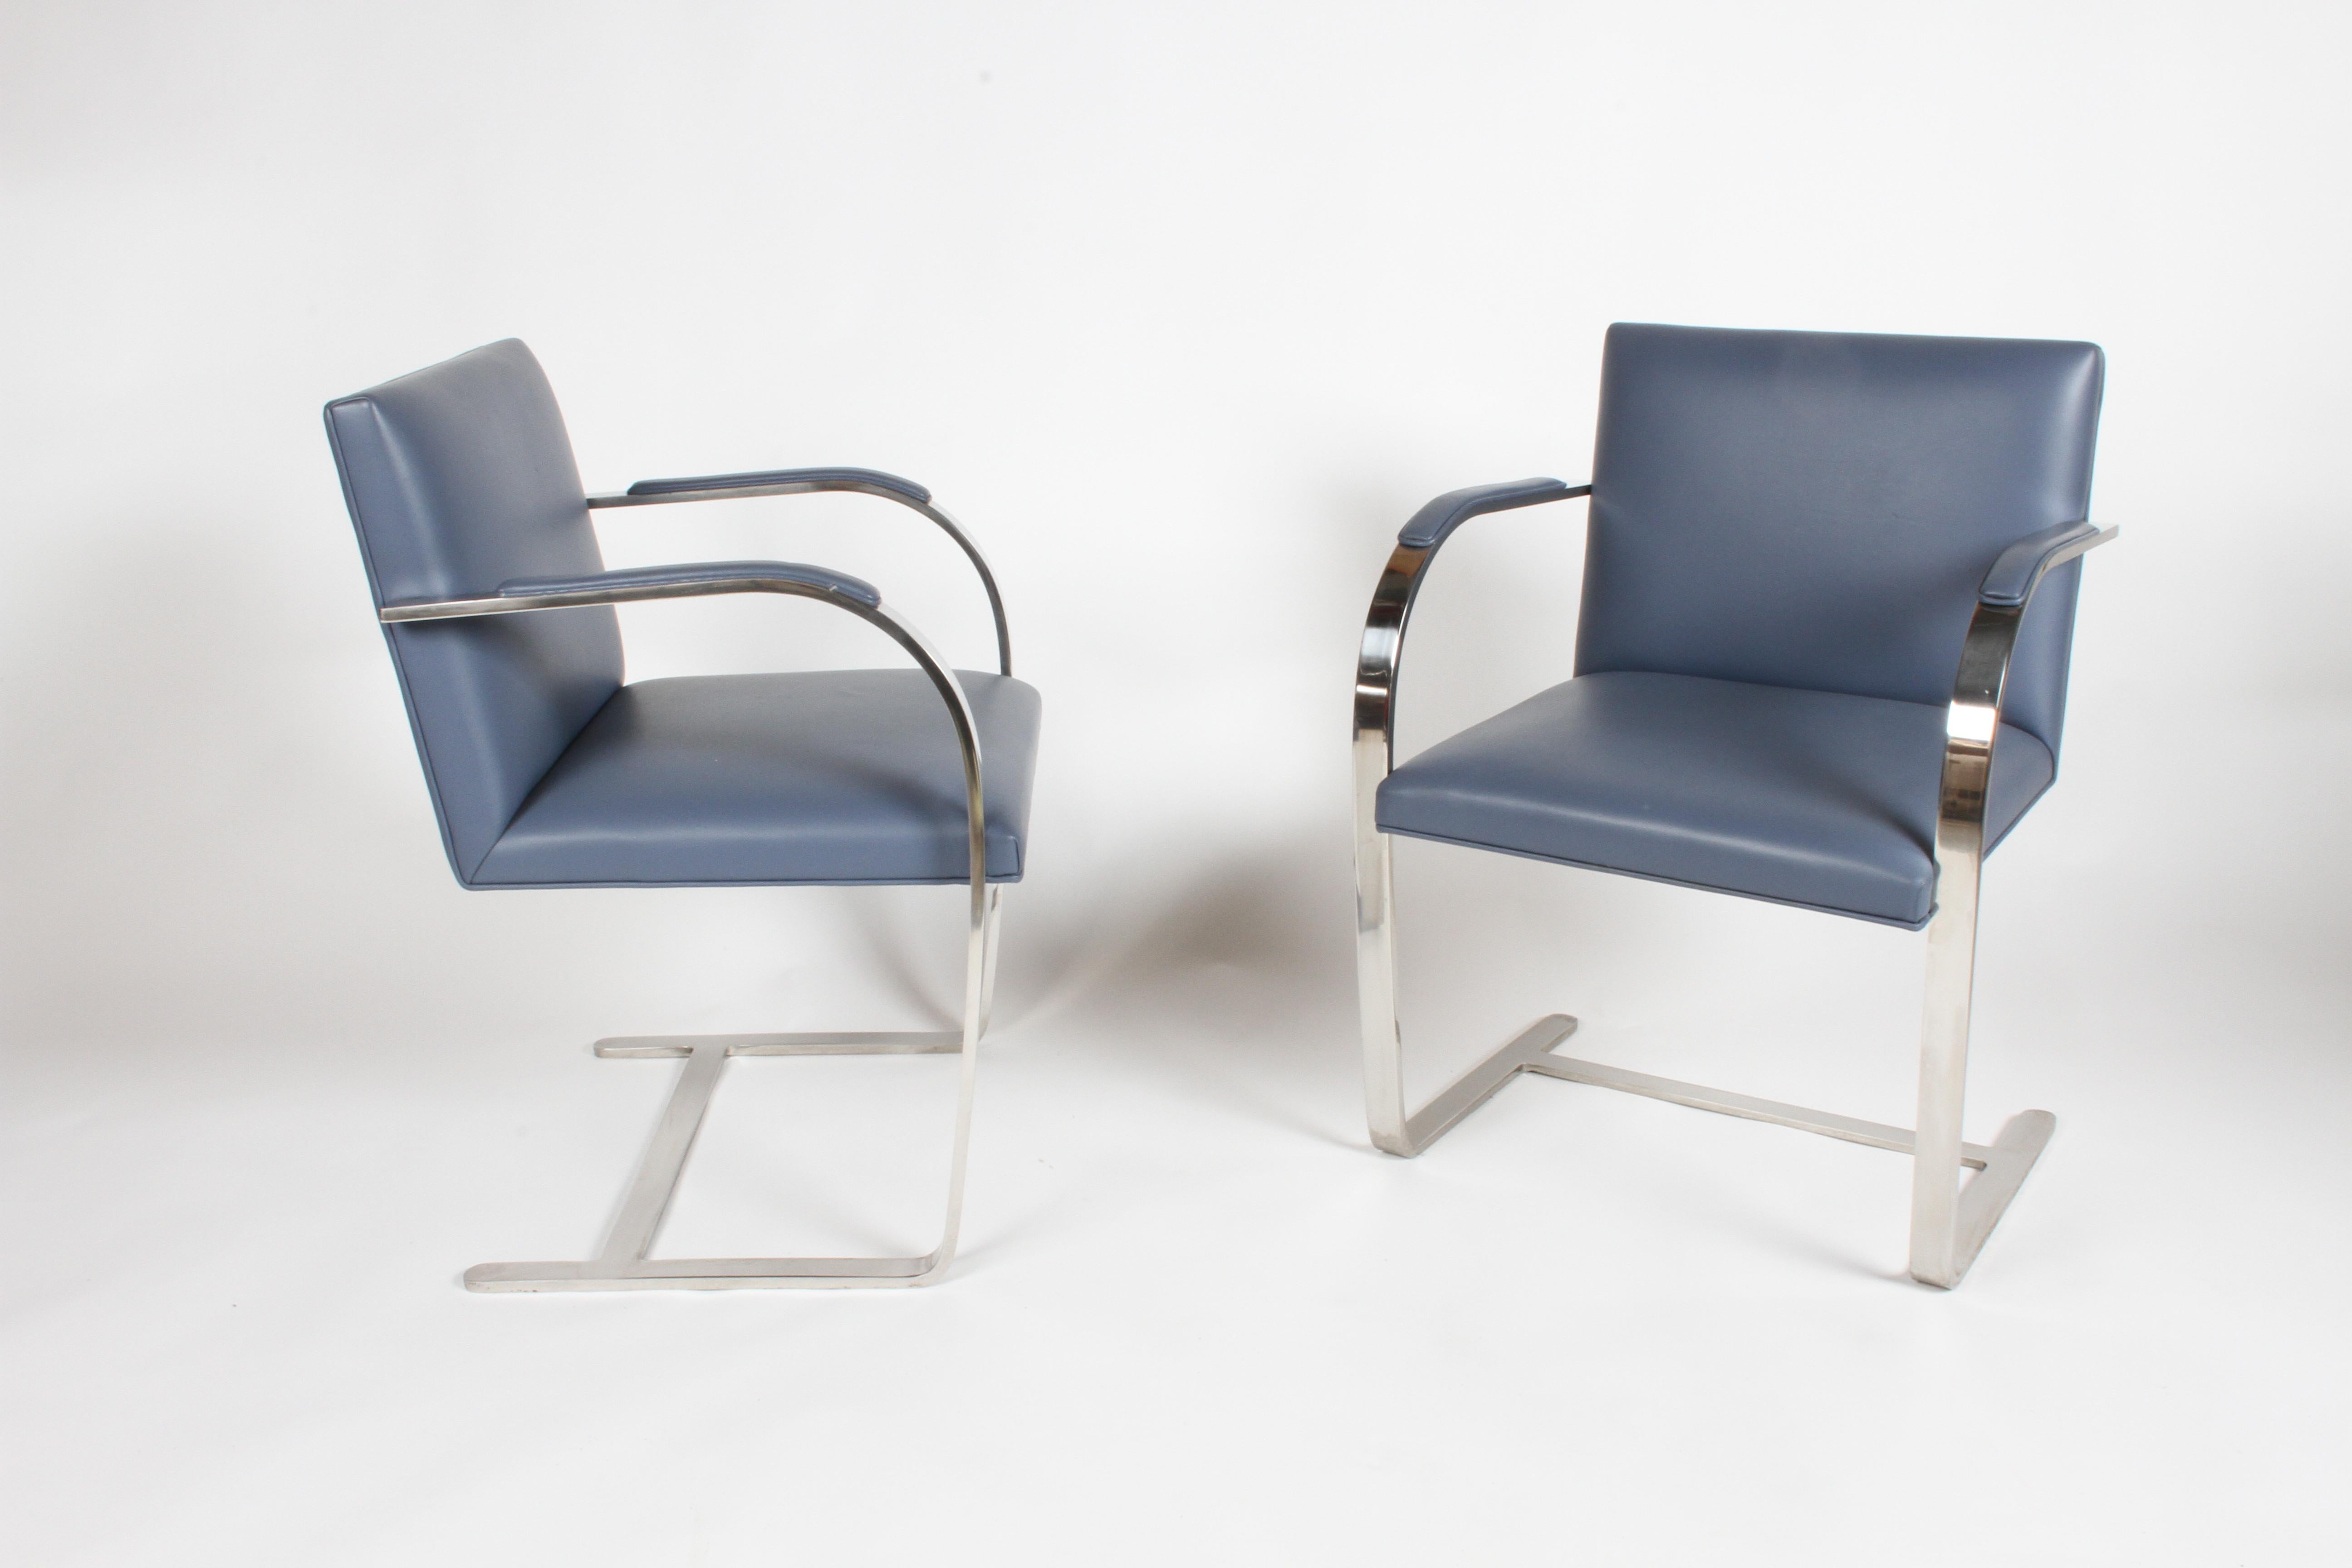 Mid-Century Modern Mies van der Rohe Flat Bar Brno Chairs by Knoll, Stainless